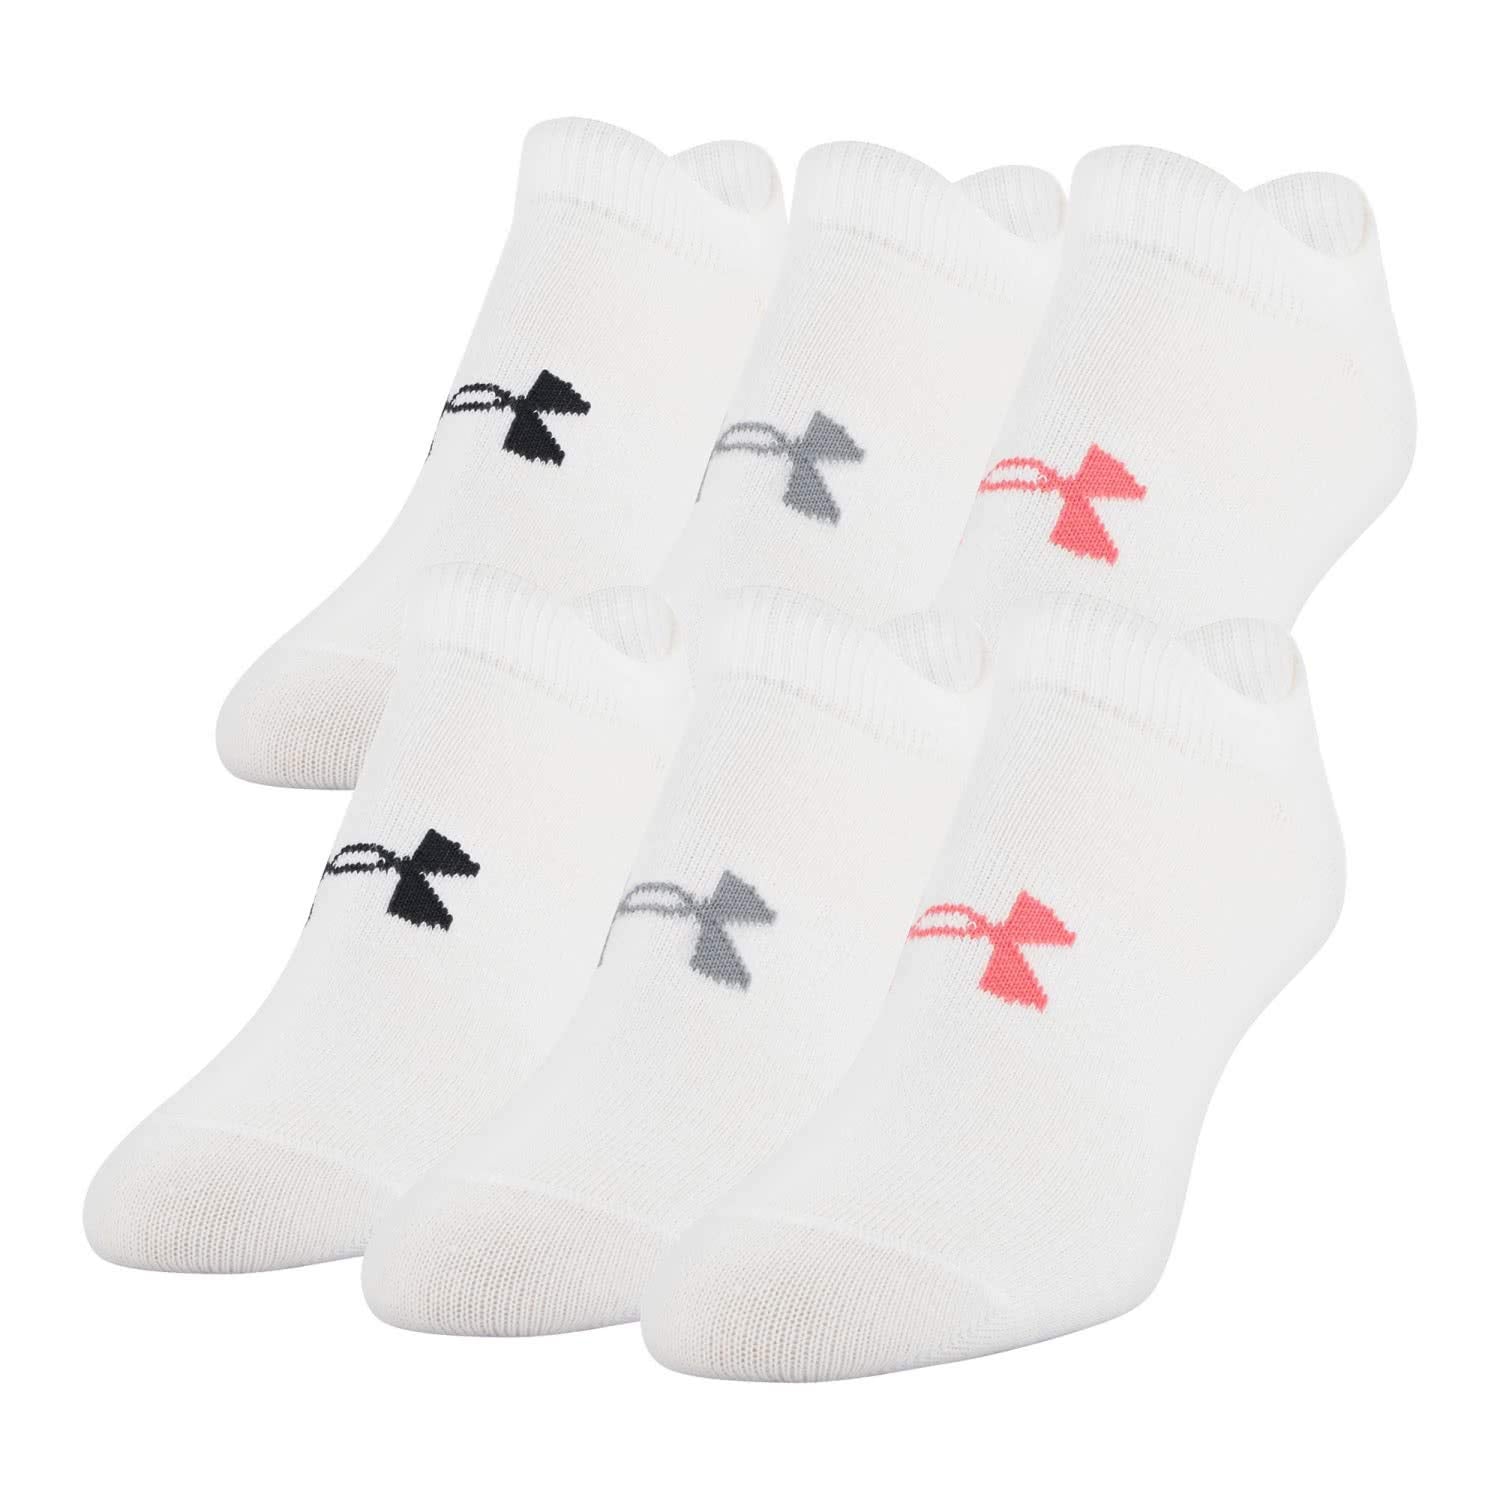 Under Armour Women's Women’s Essential Ns Extra-comfortable trainer socks, breathable compression socks